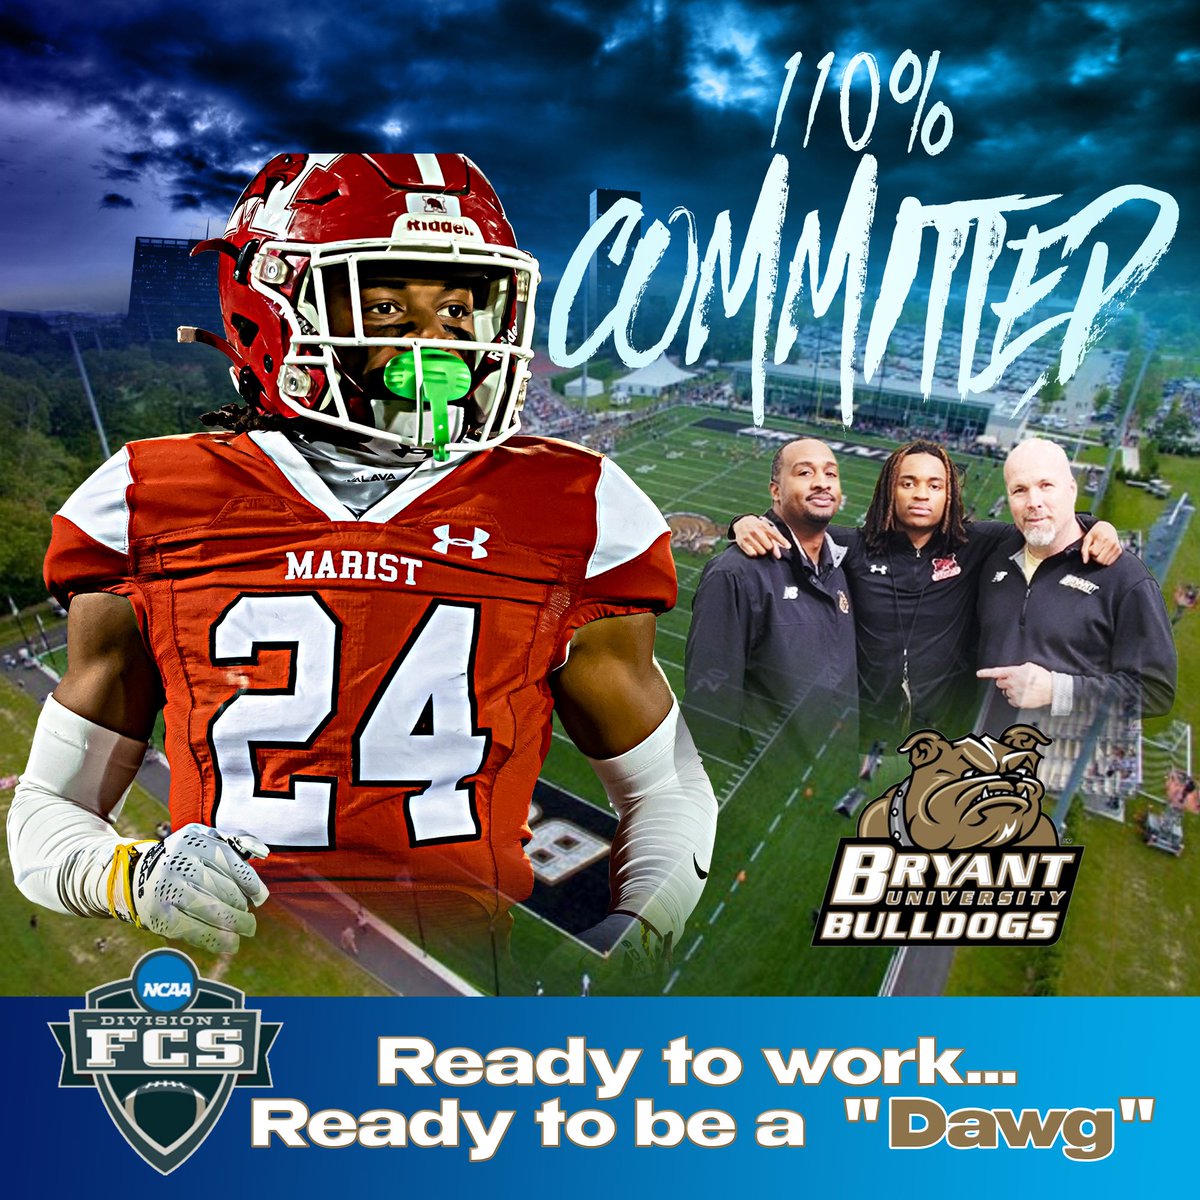 Committed...Ready to Work! I am extremely excited to announce my commitment to Bryant University! My dream to play Division 1 Football and to further my education at the highest level has come true. I'm blessed for this opportunity @CMerrittMT @WhoisCoachJones so know you have